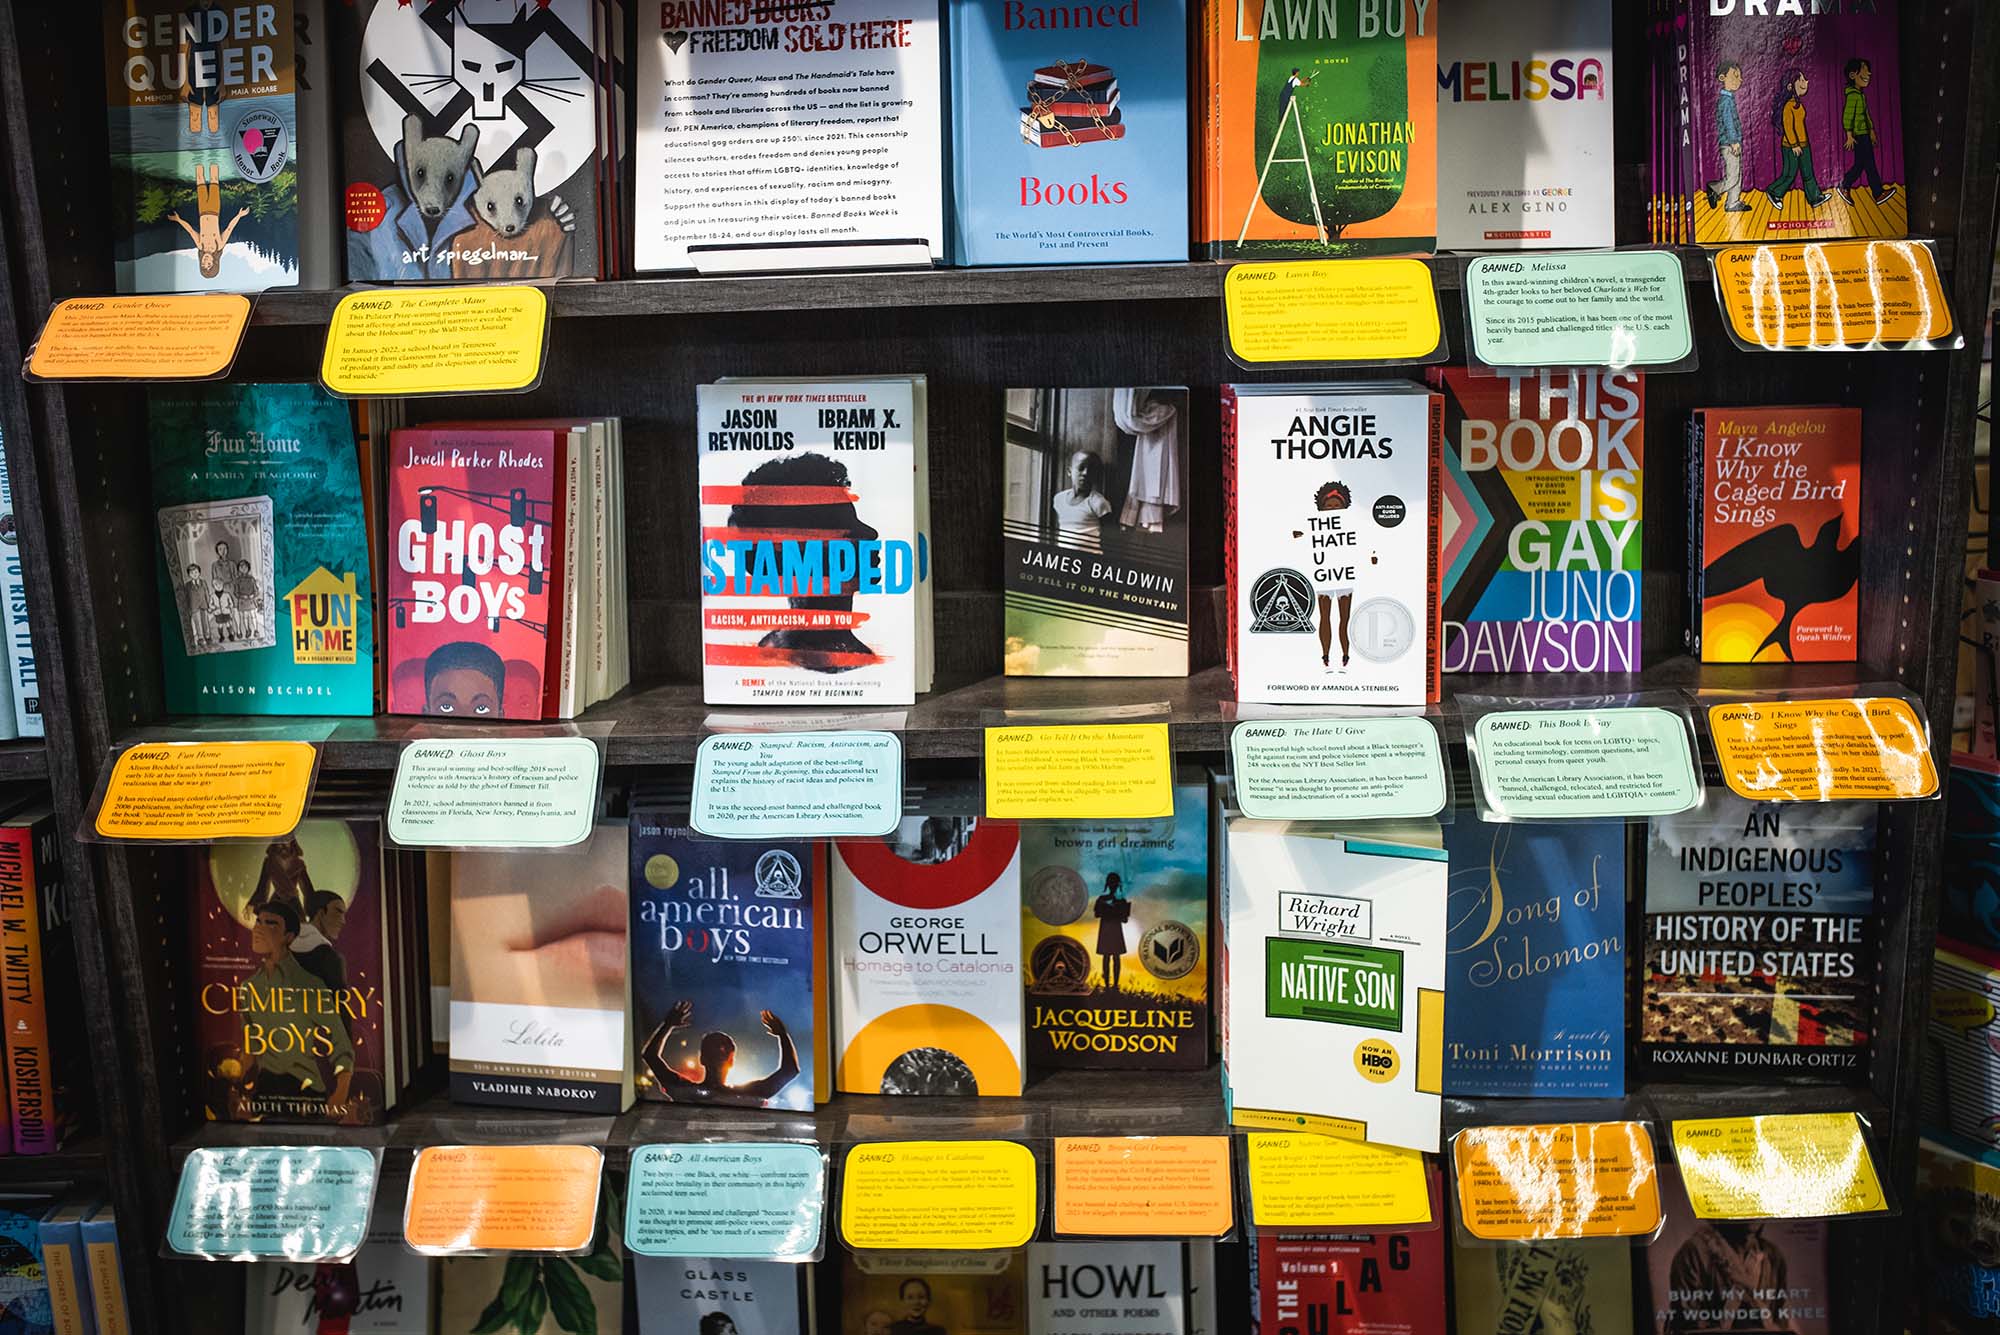 Want to Find a Banned Book? Brookline Booksmith Has Some on Display BU Today Boston University image